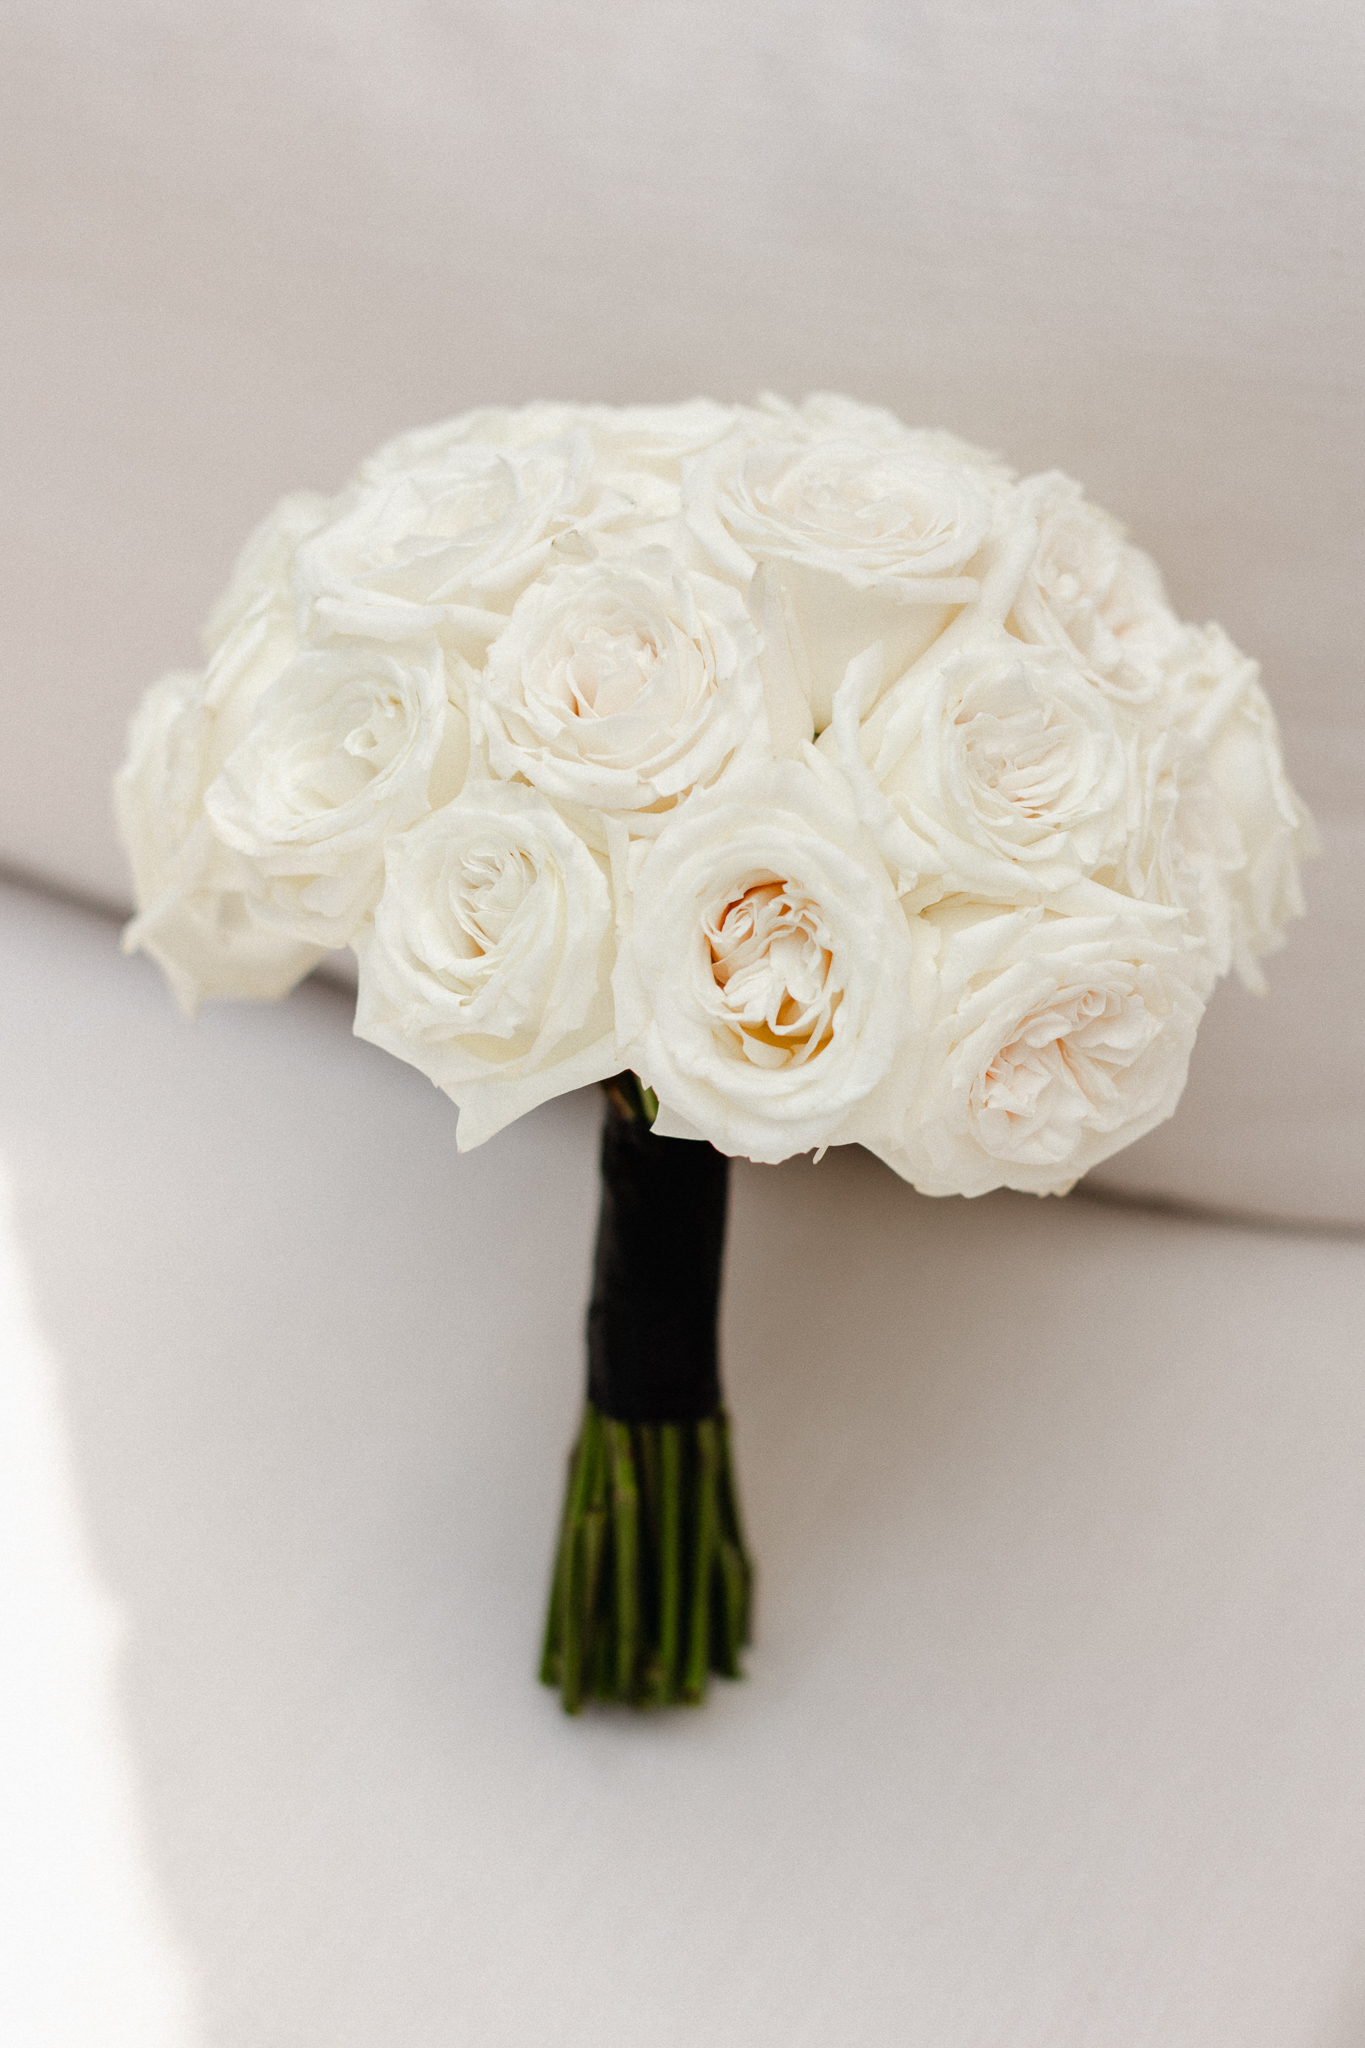 A beautiful arrangement of white roses elegantly placed on a couch, serving as a bride's bouquet.